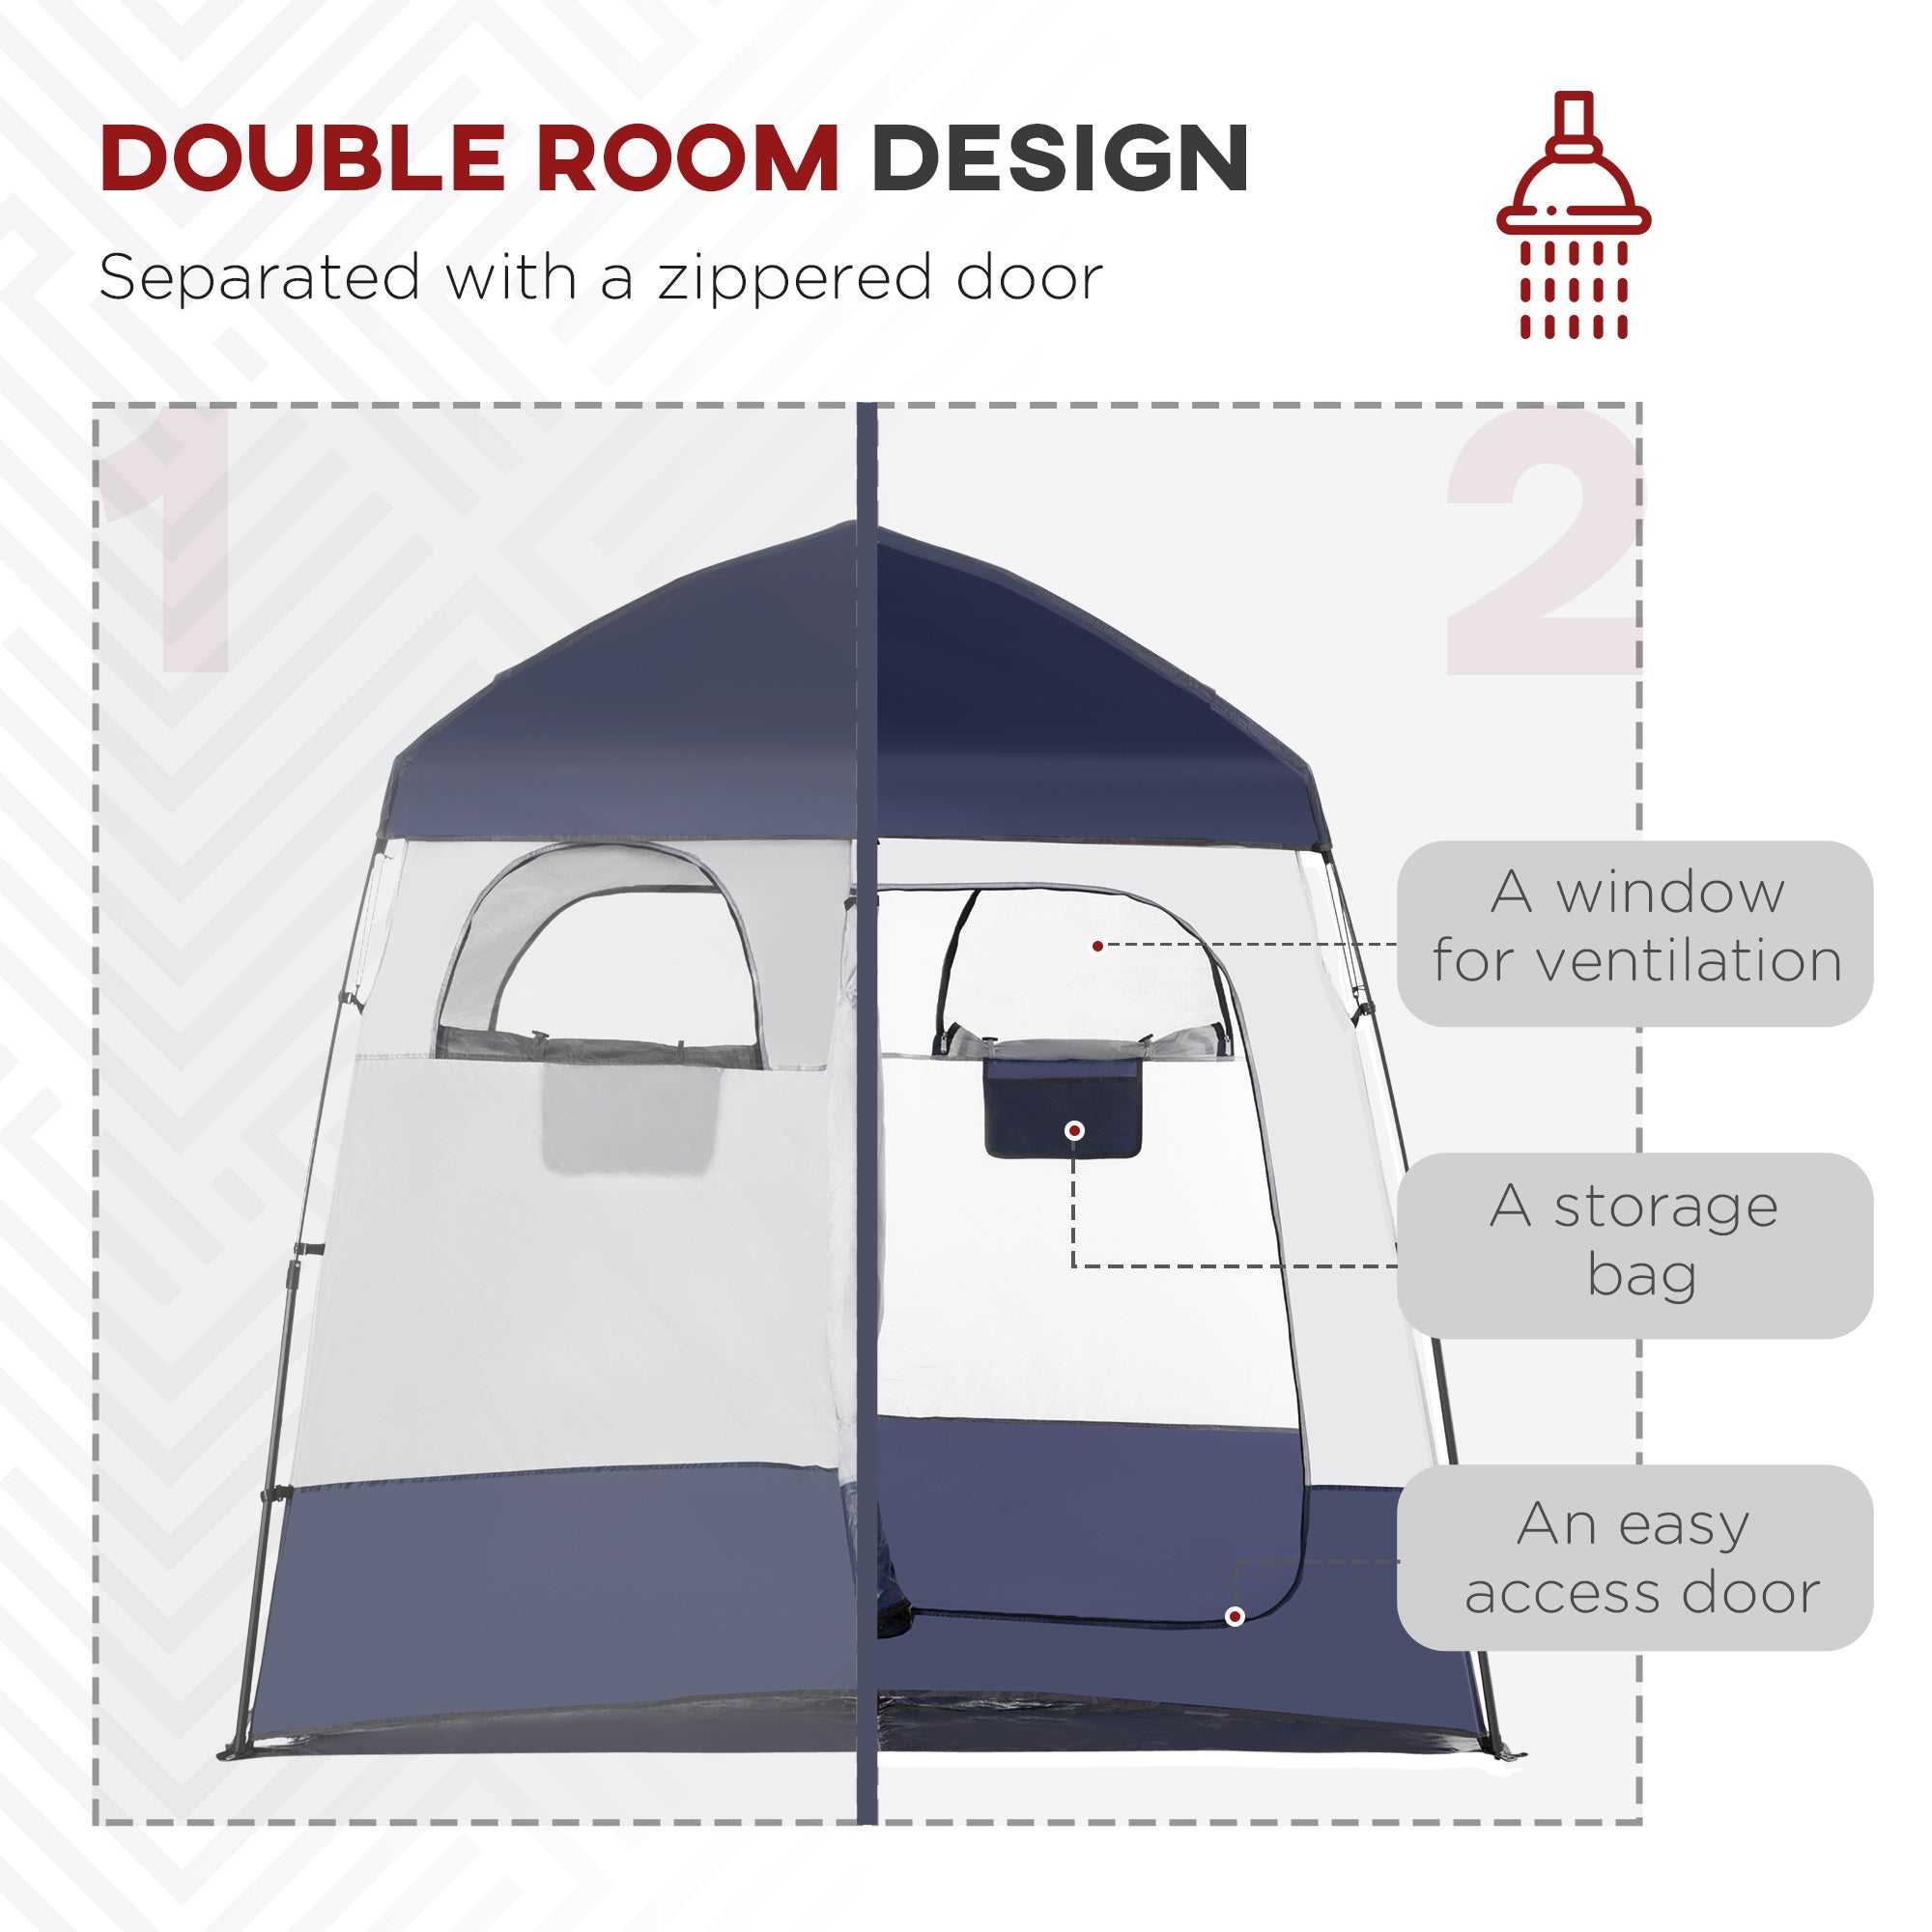 Outsunny Shower Tent, Pop Up Privacy Shelter for Camping, Dressing Changing Room, Portable Instant Outdoor Shower Tent Enclosure w/ 2 Rooms, Shower Bag, Floor and Carrying Bag, Blue